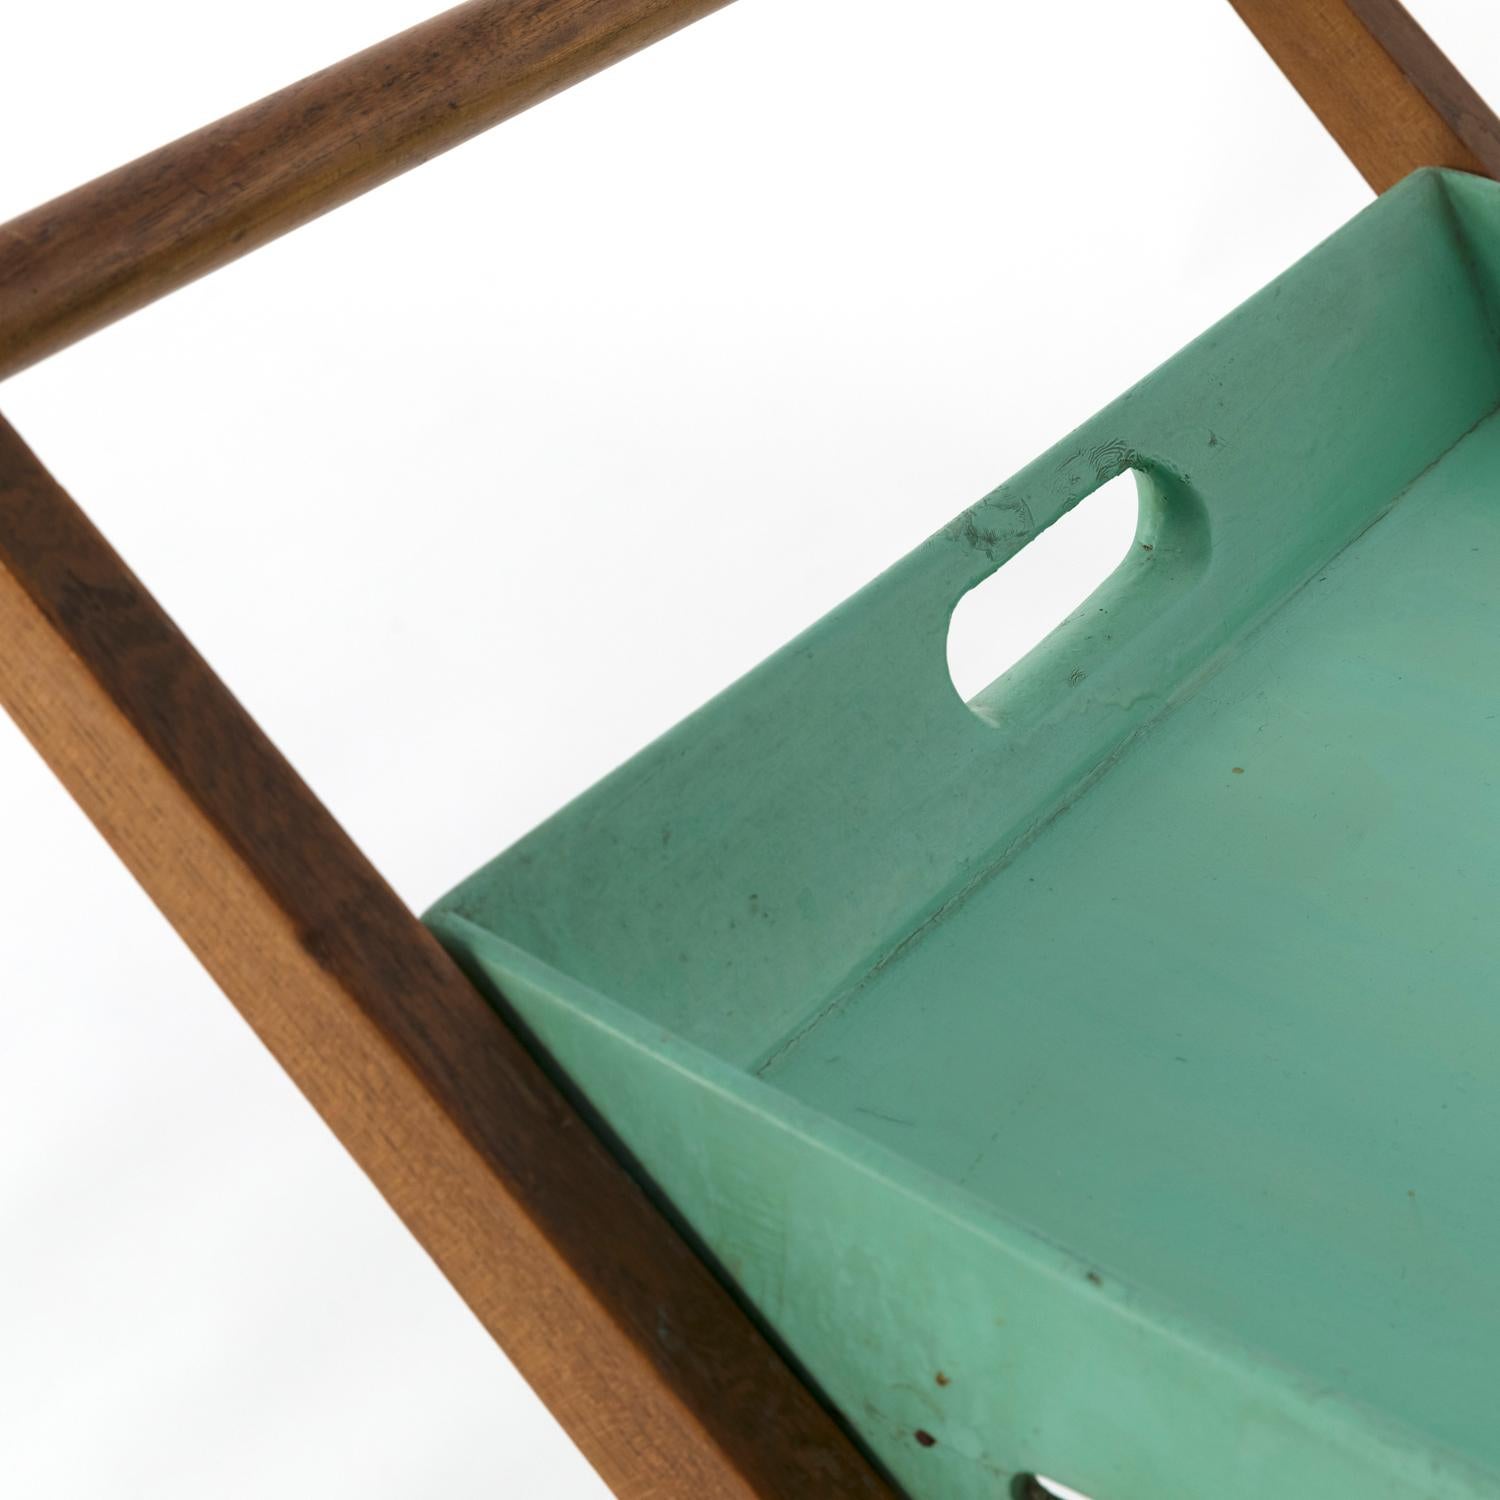 1955 foldable serving cart designed by Angelo Ostuni and manufactured by Frangi, Milan. Elm tree wood, brass details and original green painted tray. Copy of the historical publication will be provided.